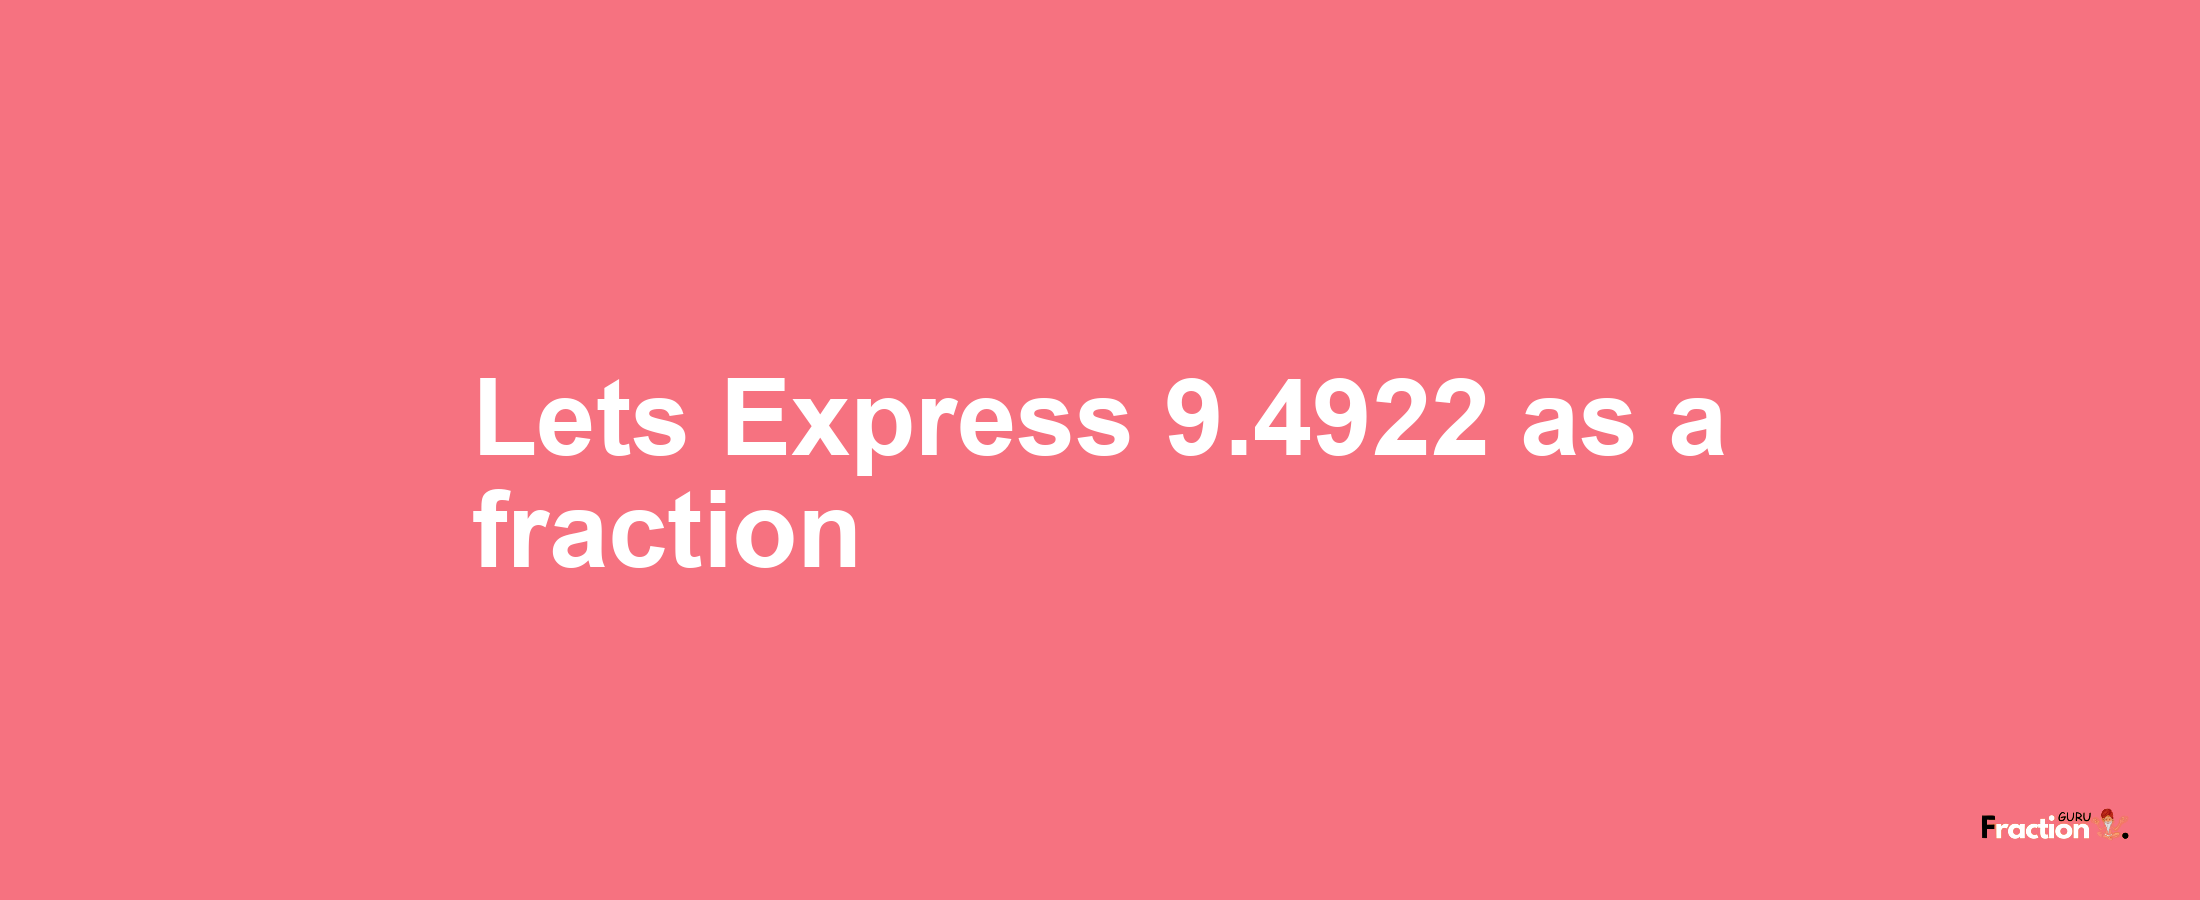 Lets Express 9.4922 as afraction